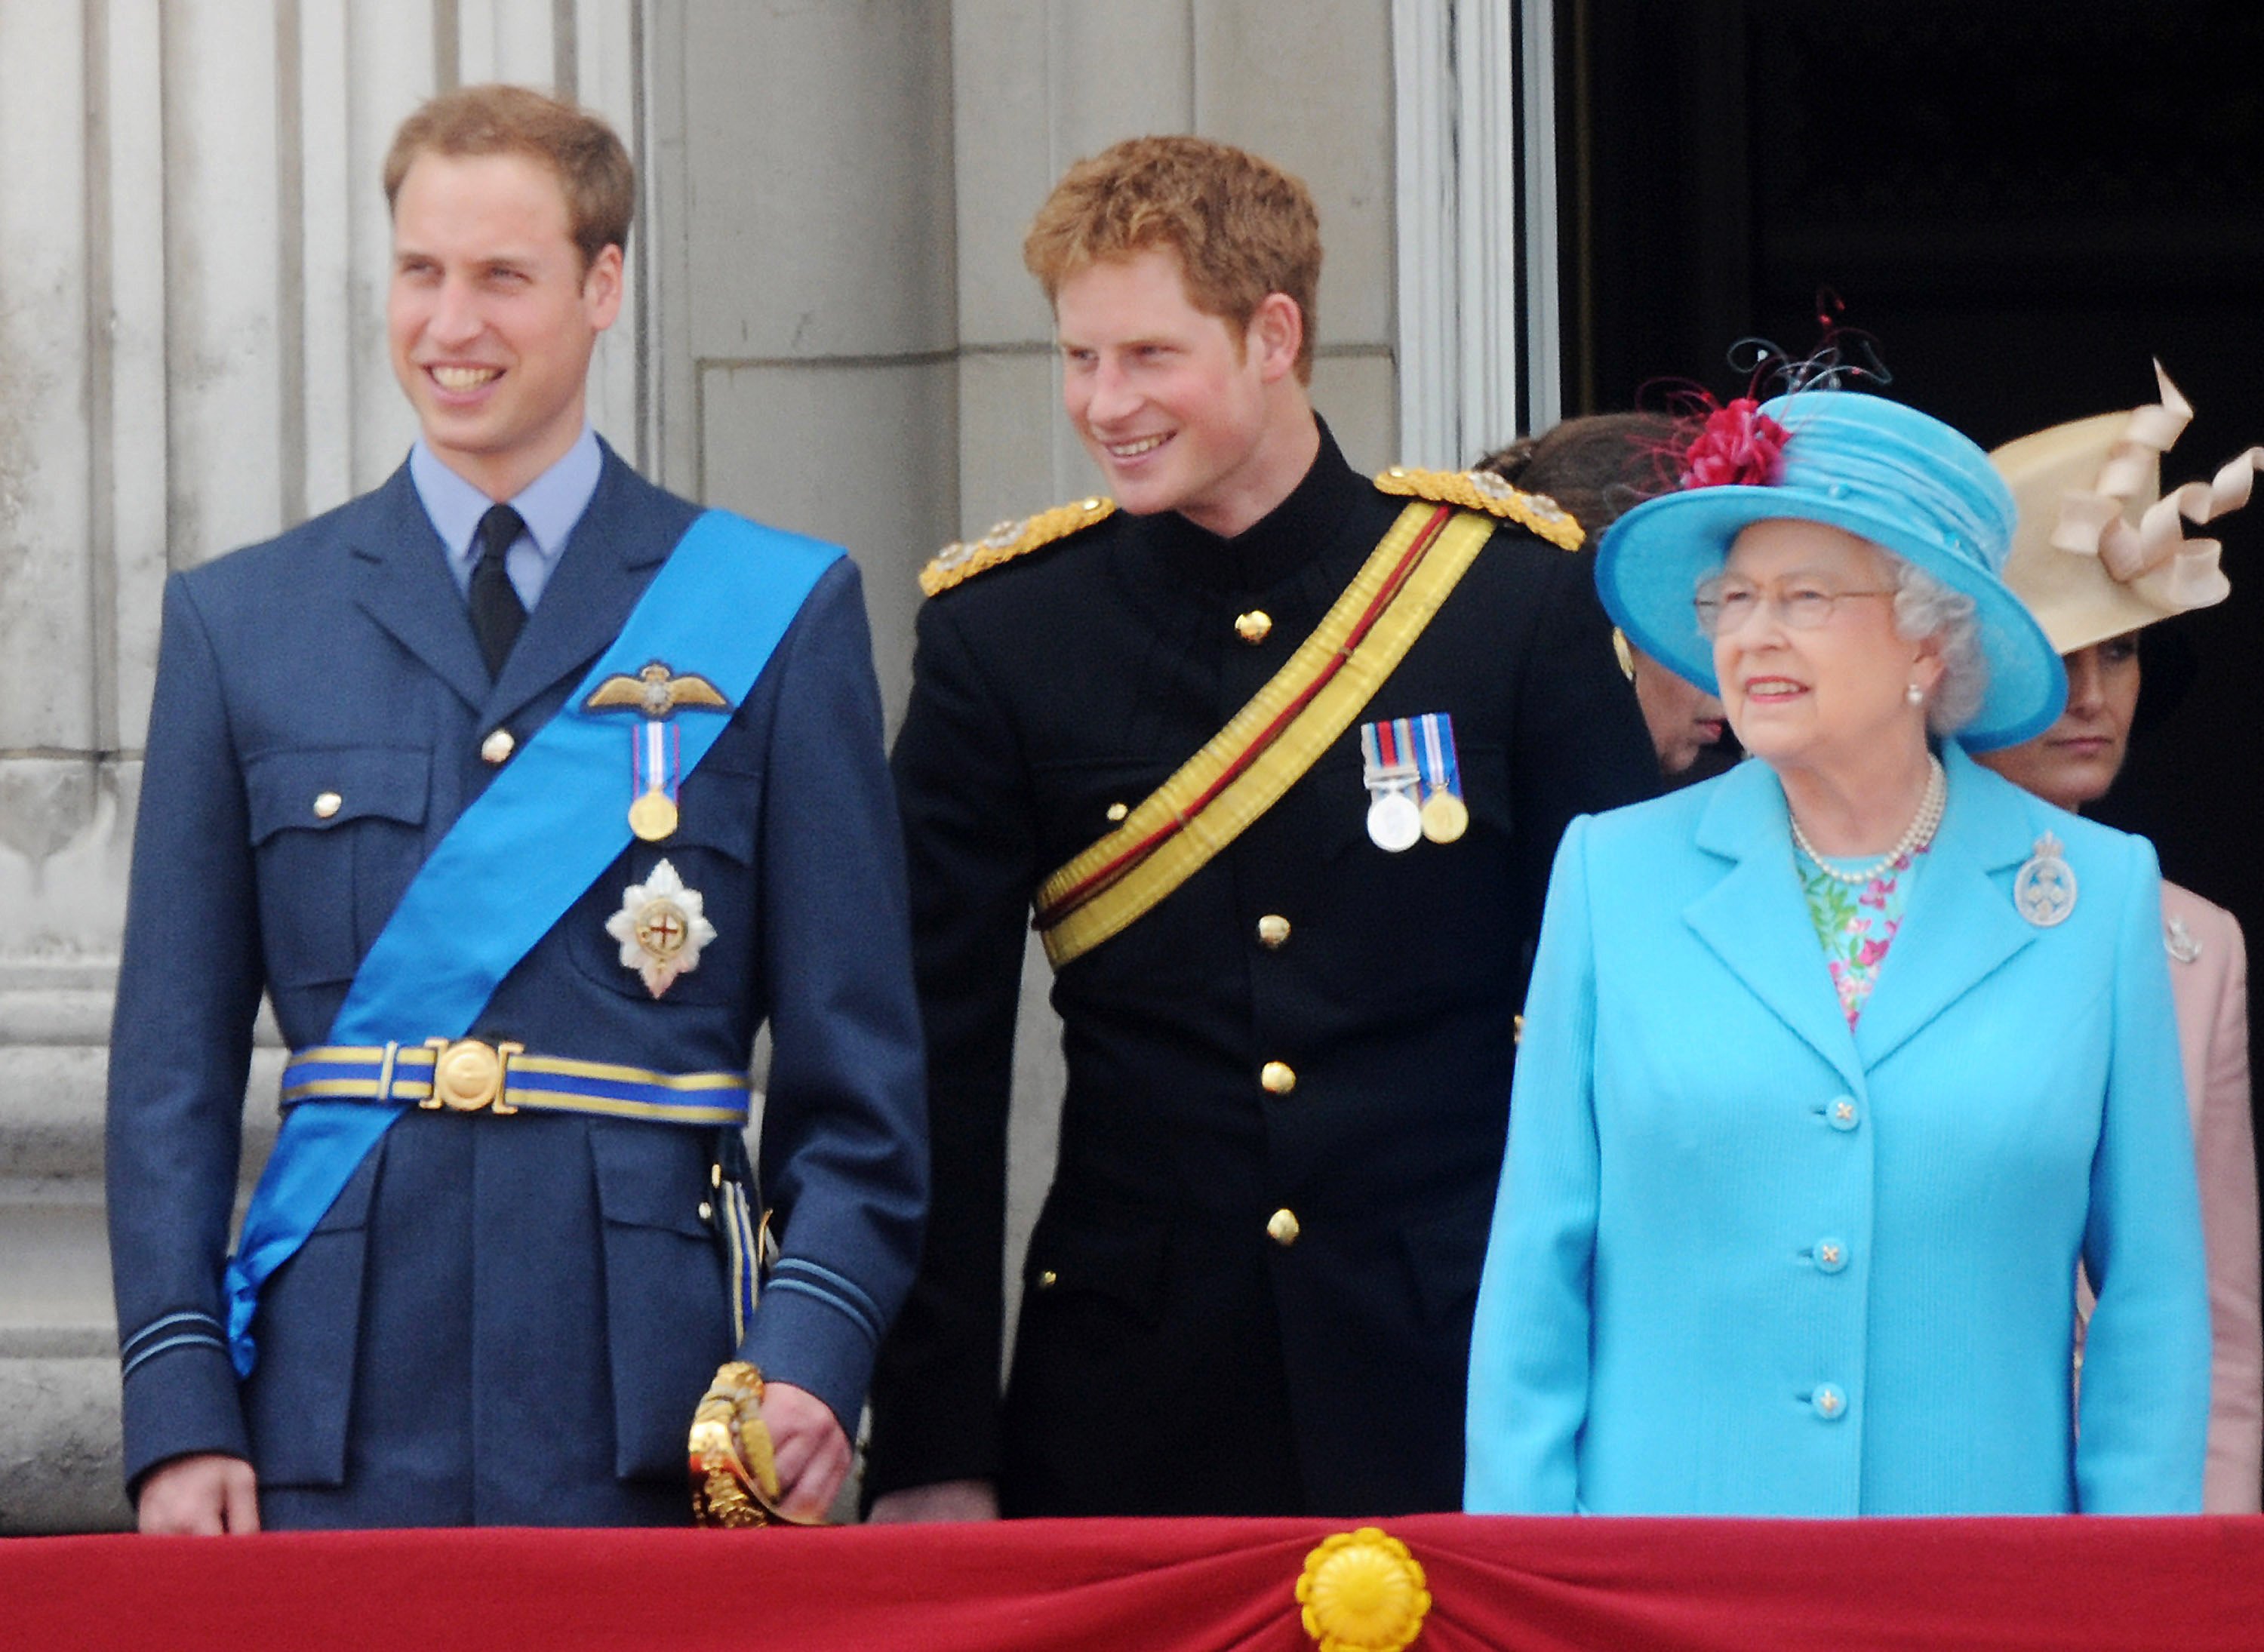 Prince William, Prince Harry and Queen Elizabeth II watching a fly past from the balcony of Buckingham Palace during Trooping The Colour on June 13, 2008 in London, England. │Source: Getty Images